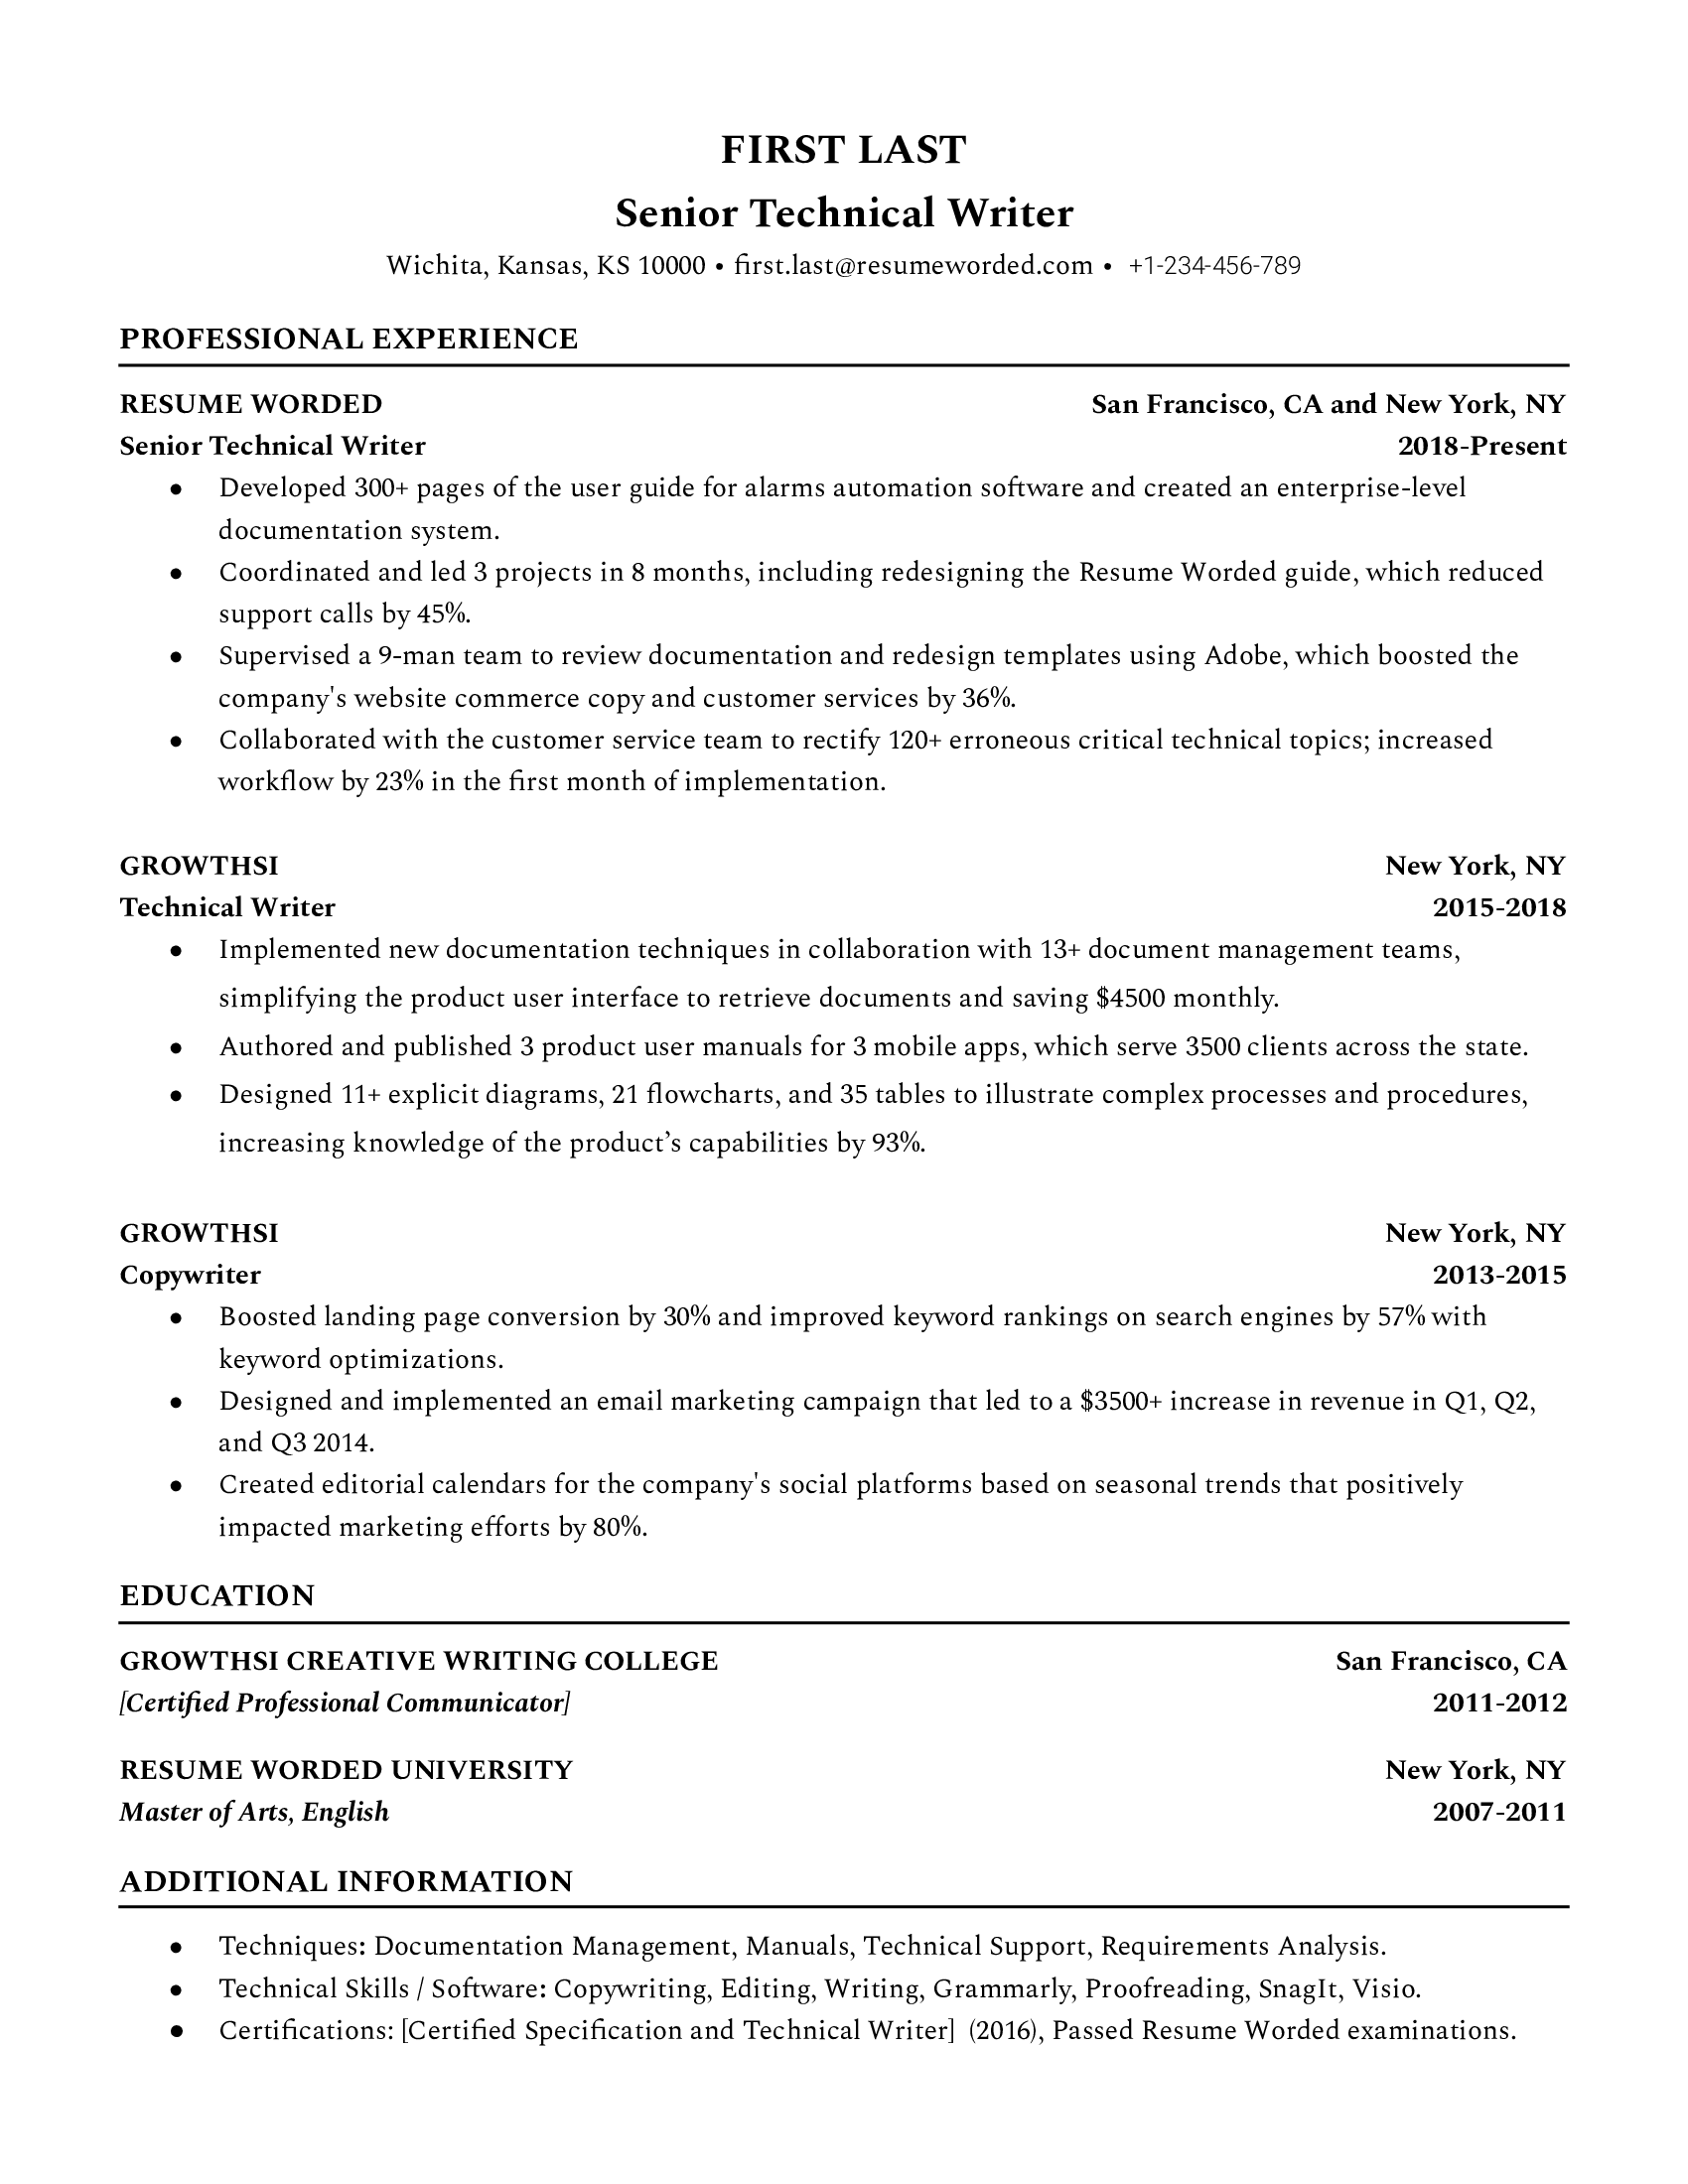 A senior technical writer resume sample that highlights the applicant’s career progression and quantifiable experience.